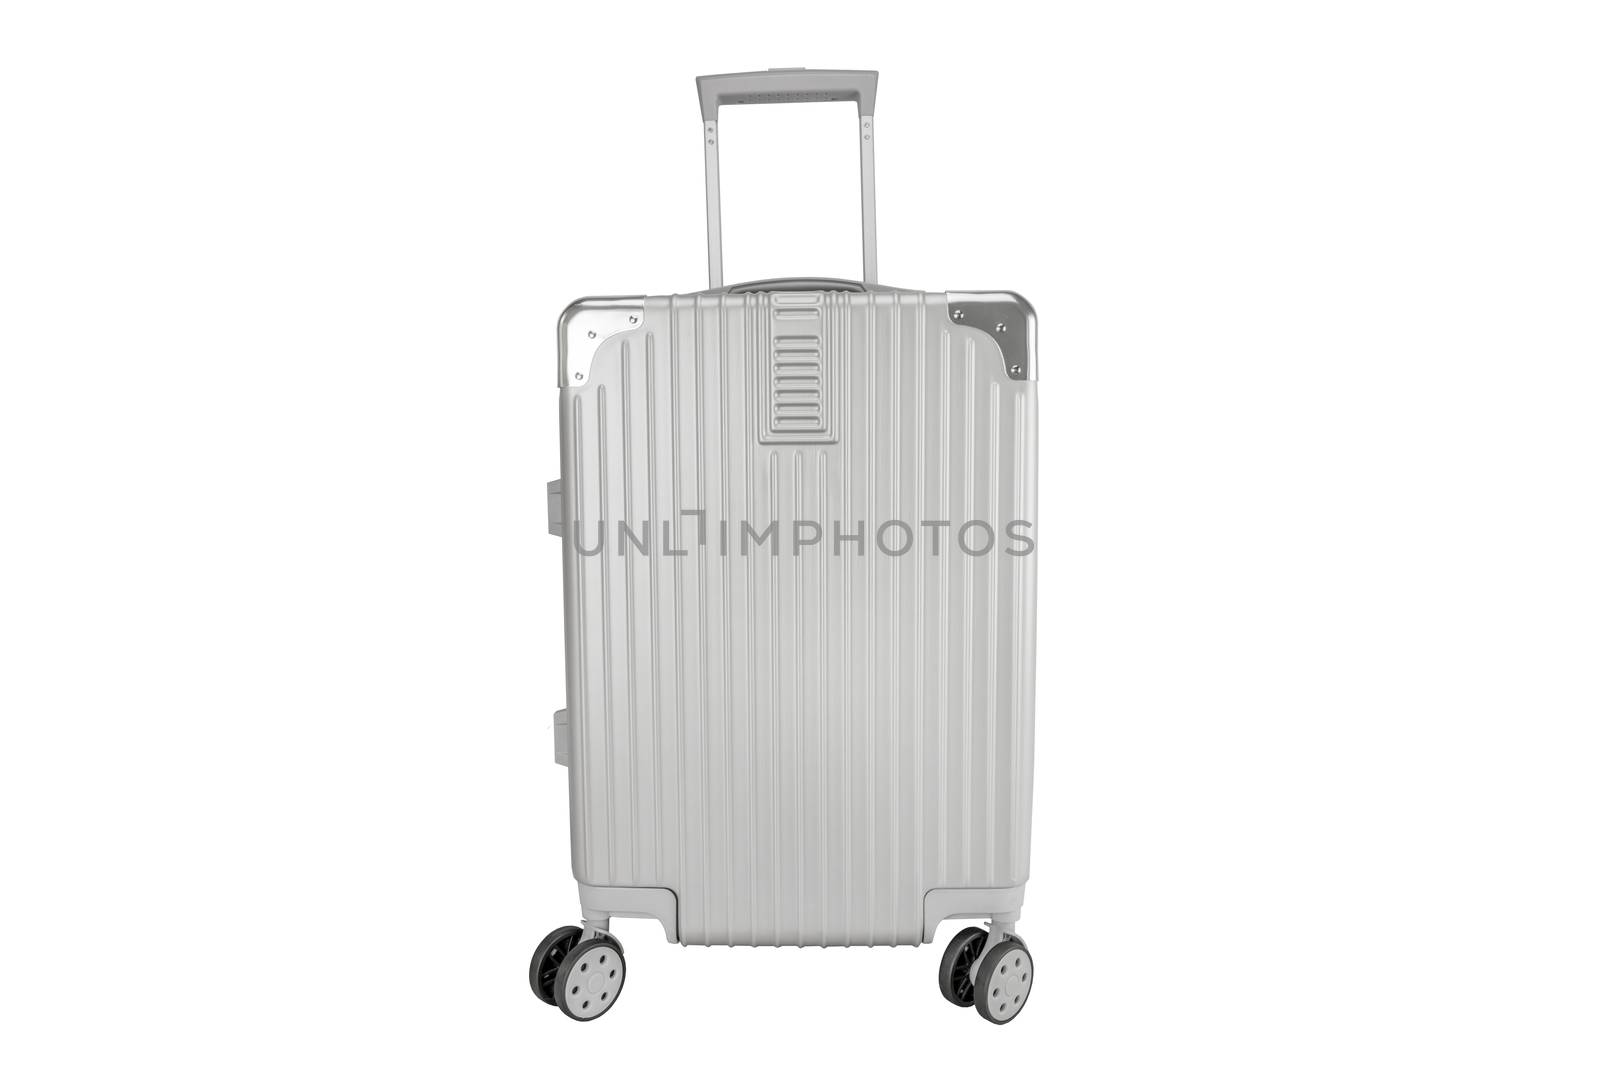 Silver luggage bag on isolated white background by Buttus_casso